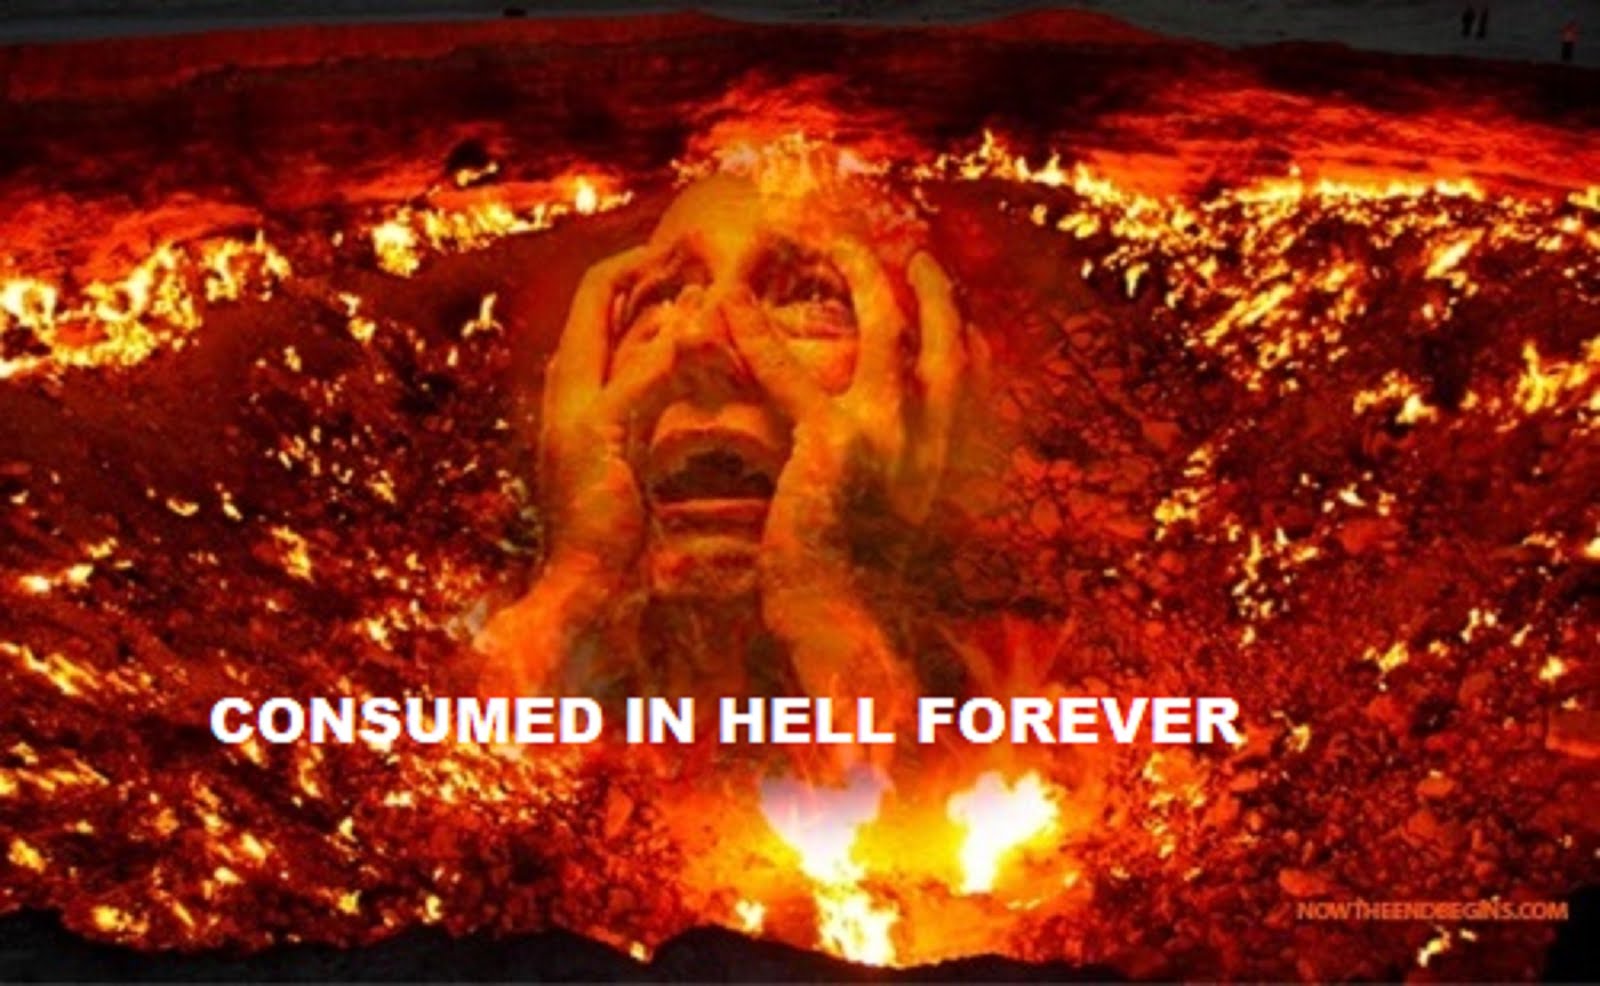 10 CHRISTIAN LADY CONSUMED IN HELL 10